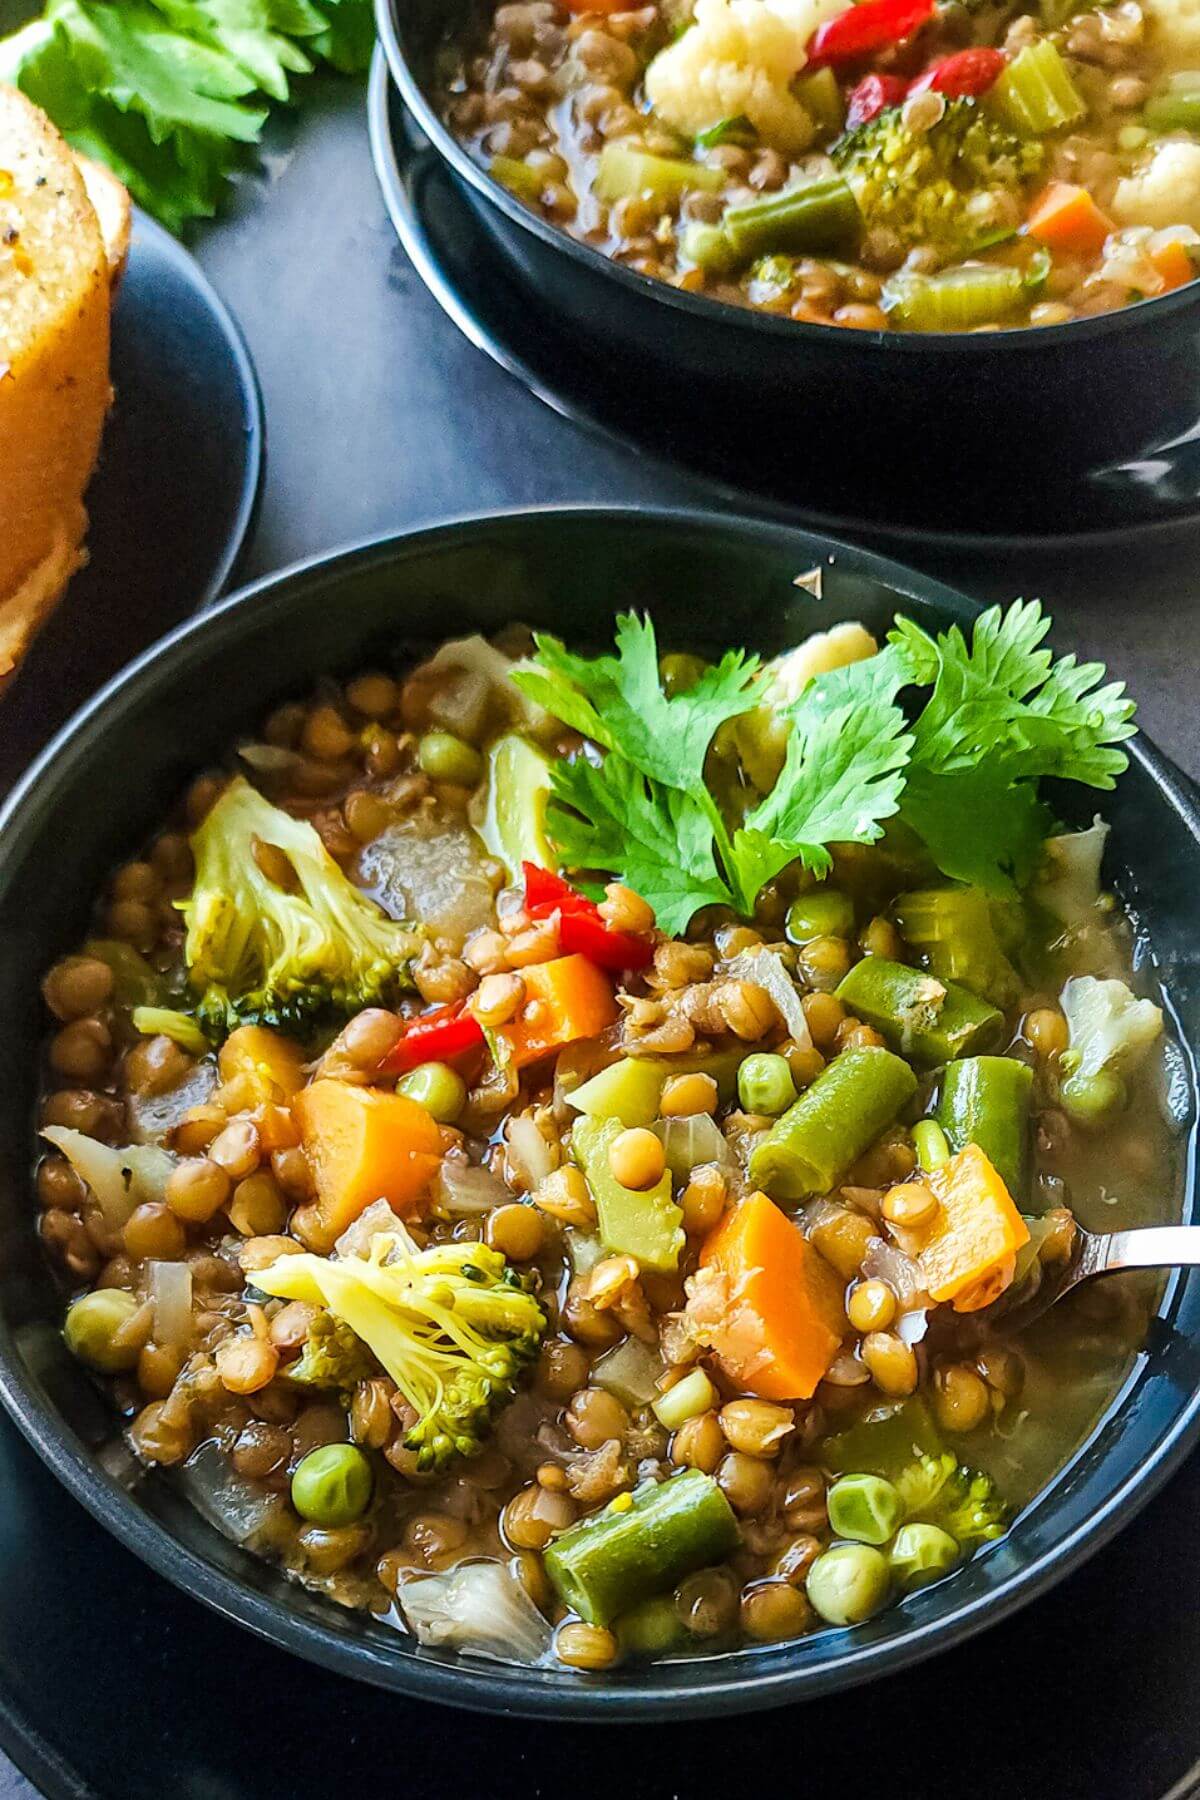 Two bowls of lentils soup with vegetables.